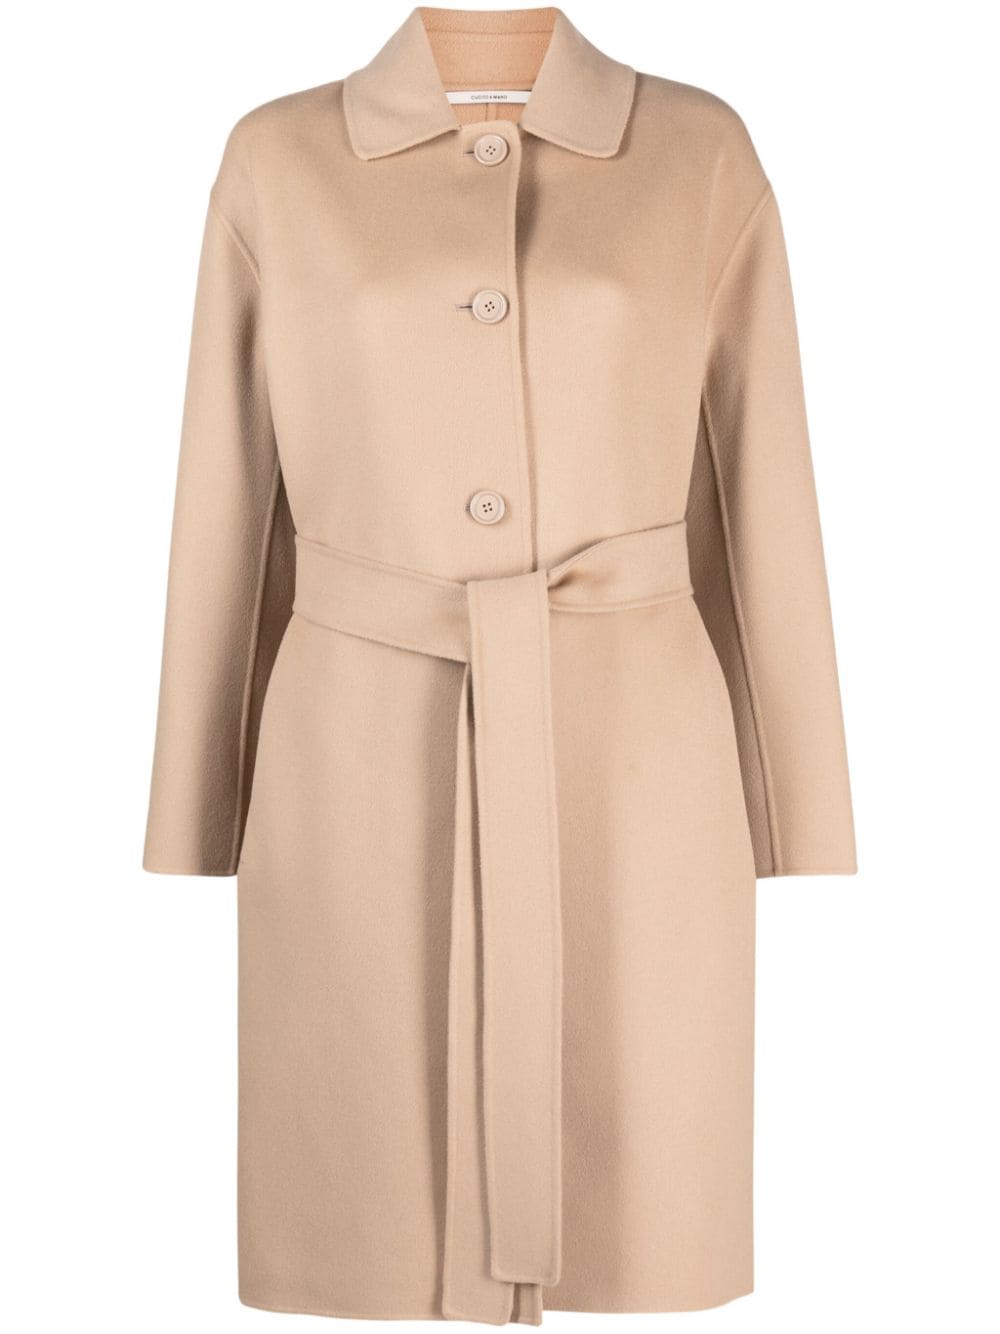 'S Max Mara belted single-breasted wool coat